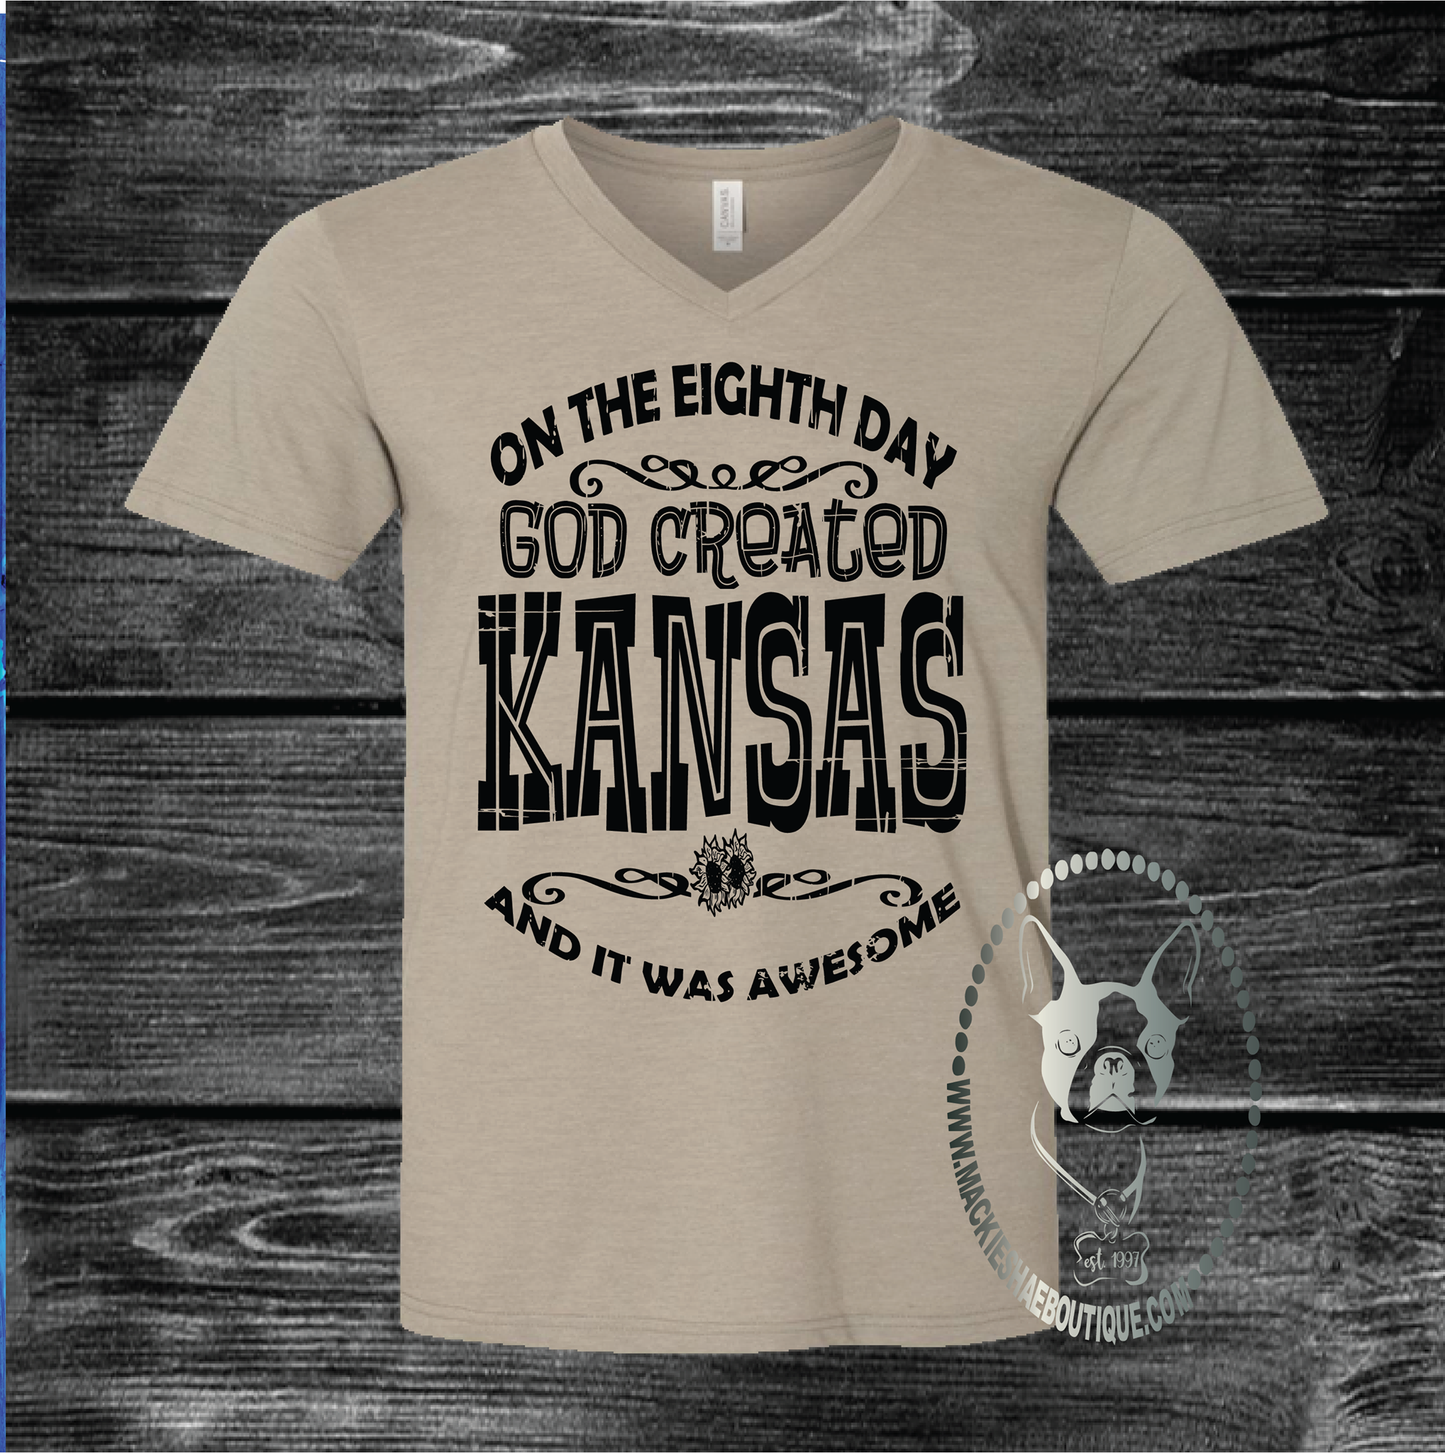 On the Eighth Day, God Created KANSAS And It Was Awesome Custom Shirt, Short-Sleeve